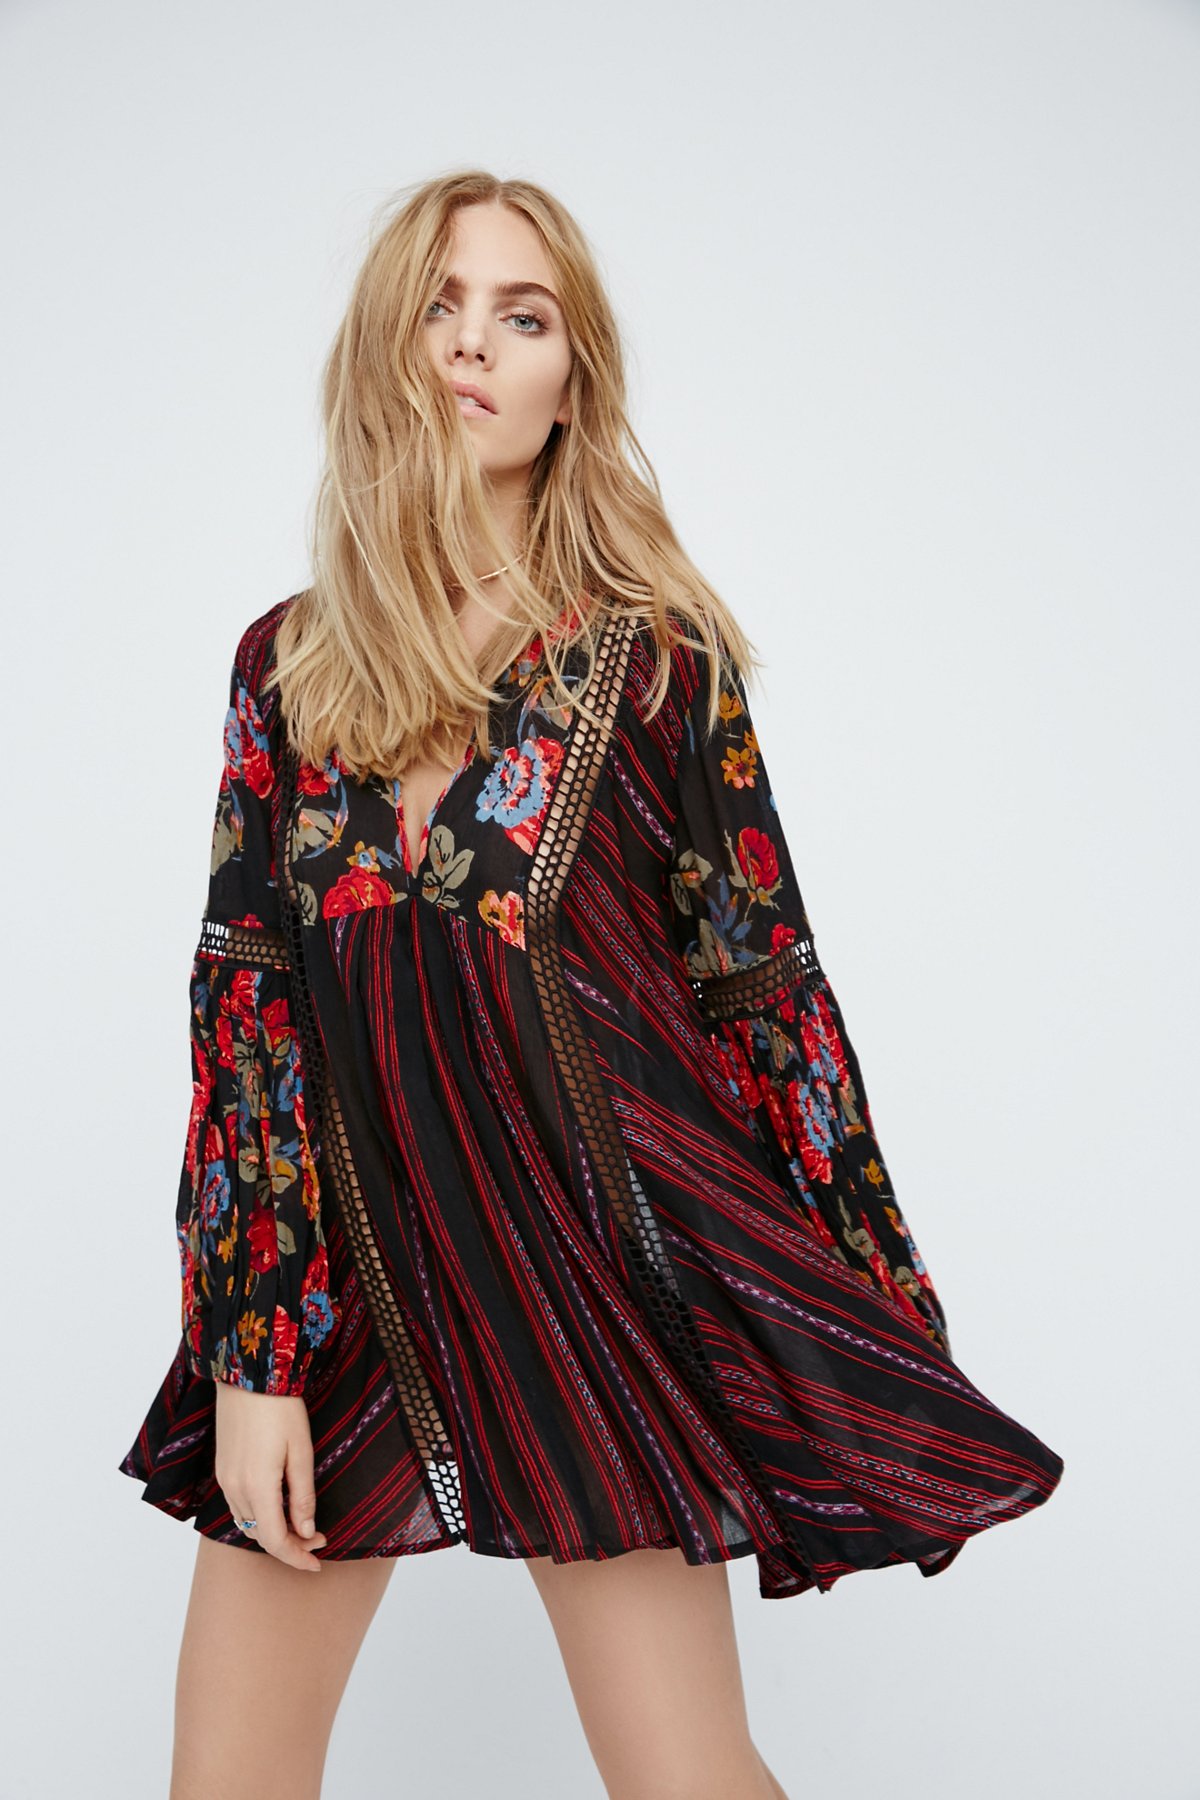 Just The Two Of Us Mixed Printed Tunic at Free People Clothing Boutique